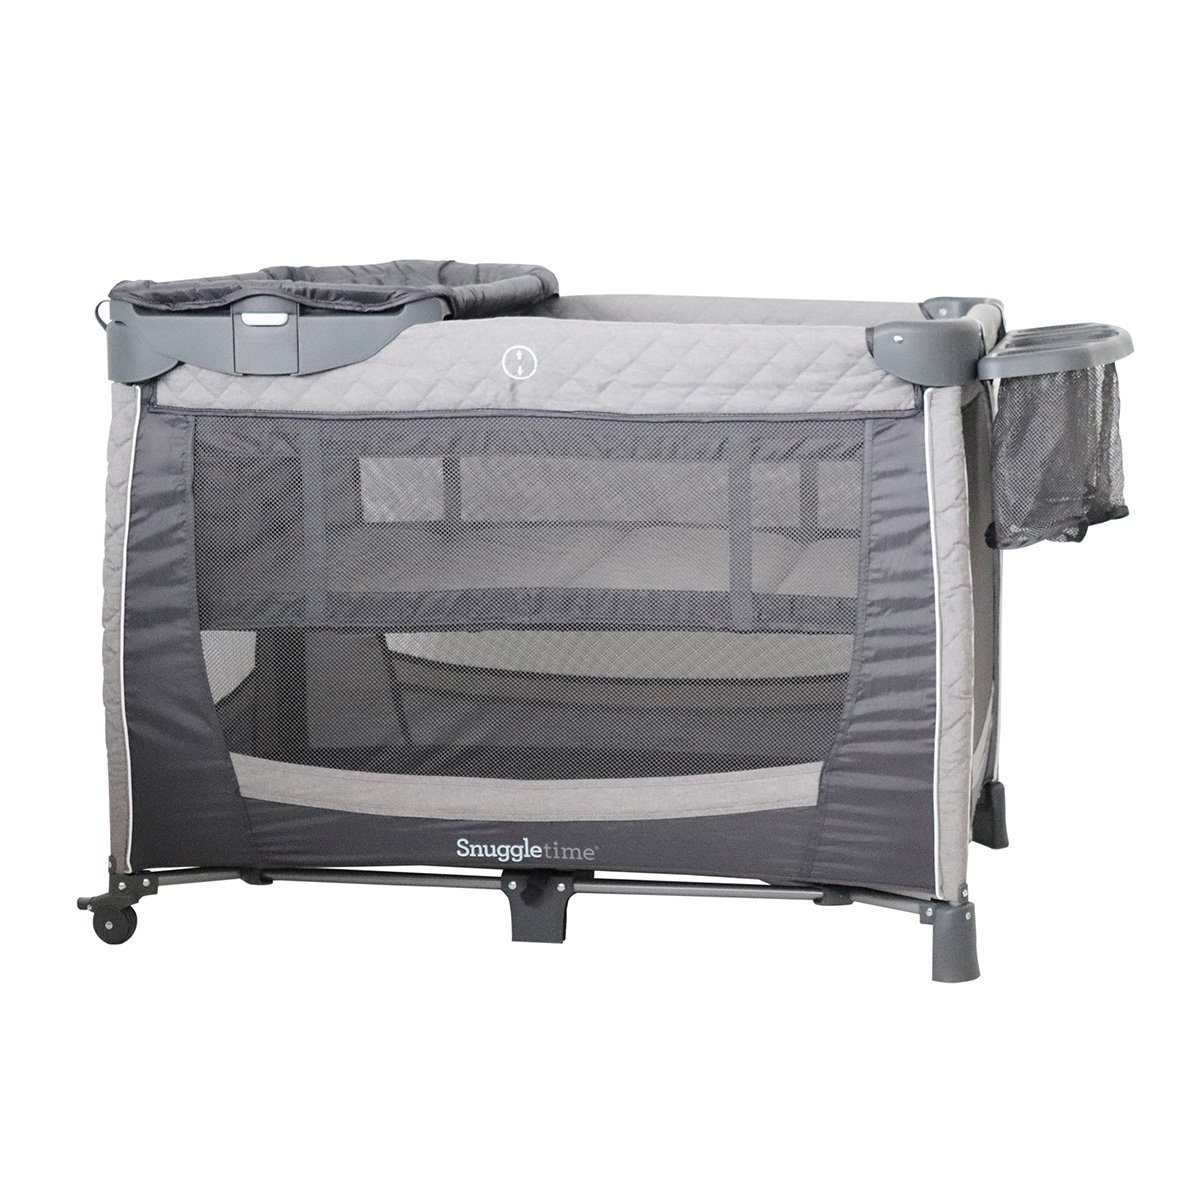 Snuggletime Luxury Camp Cot with Changer - 300609